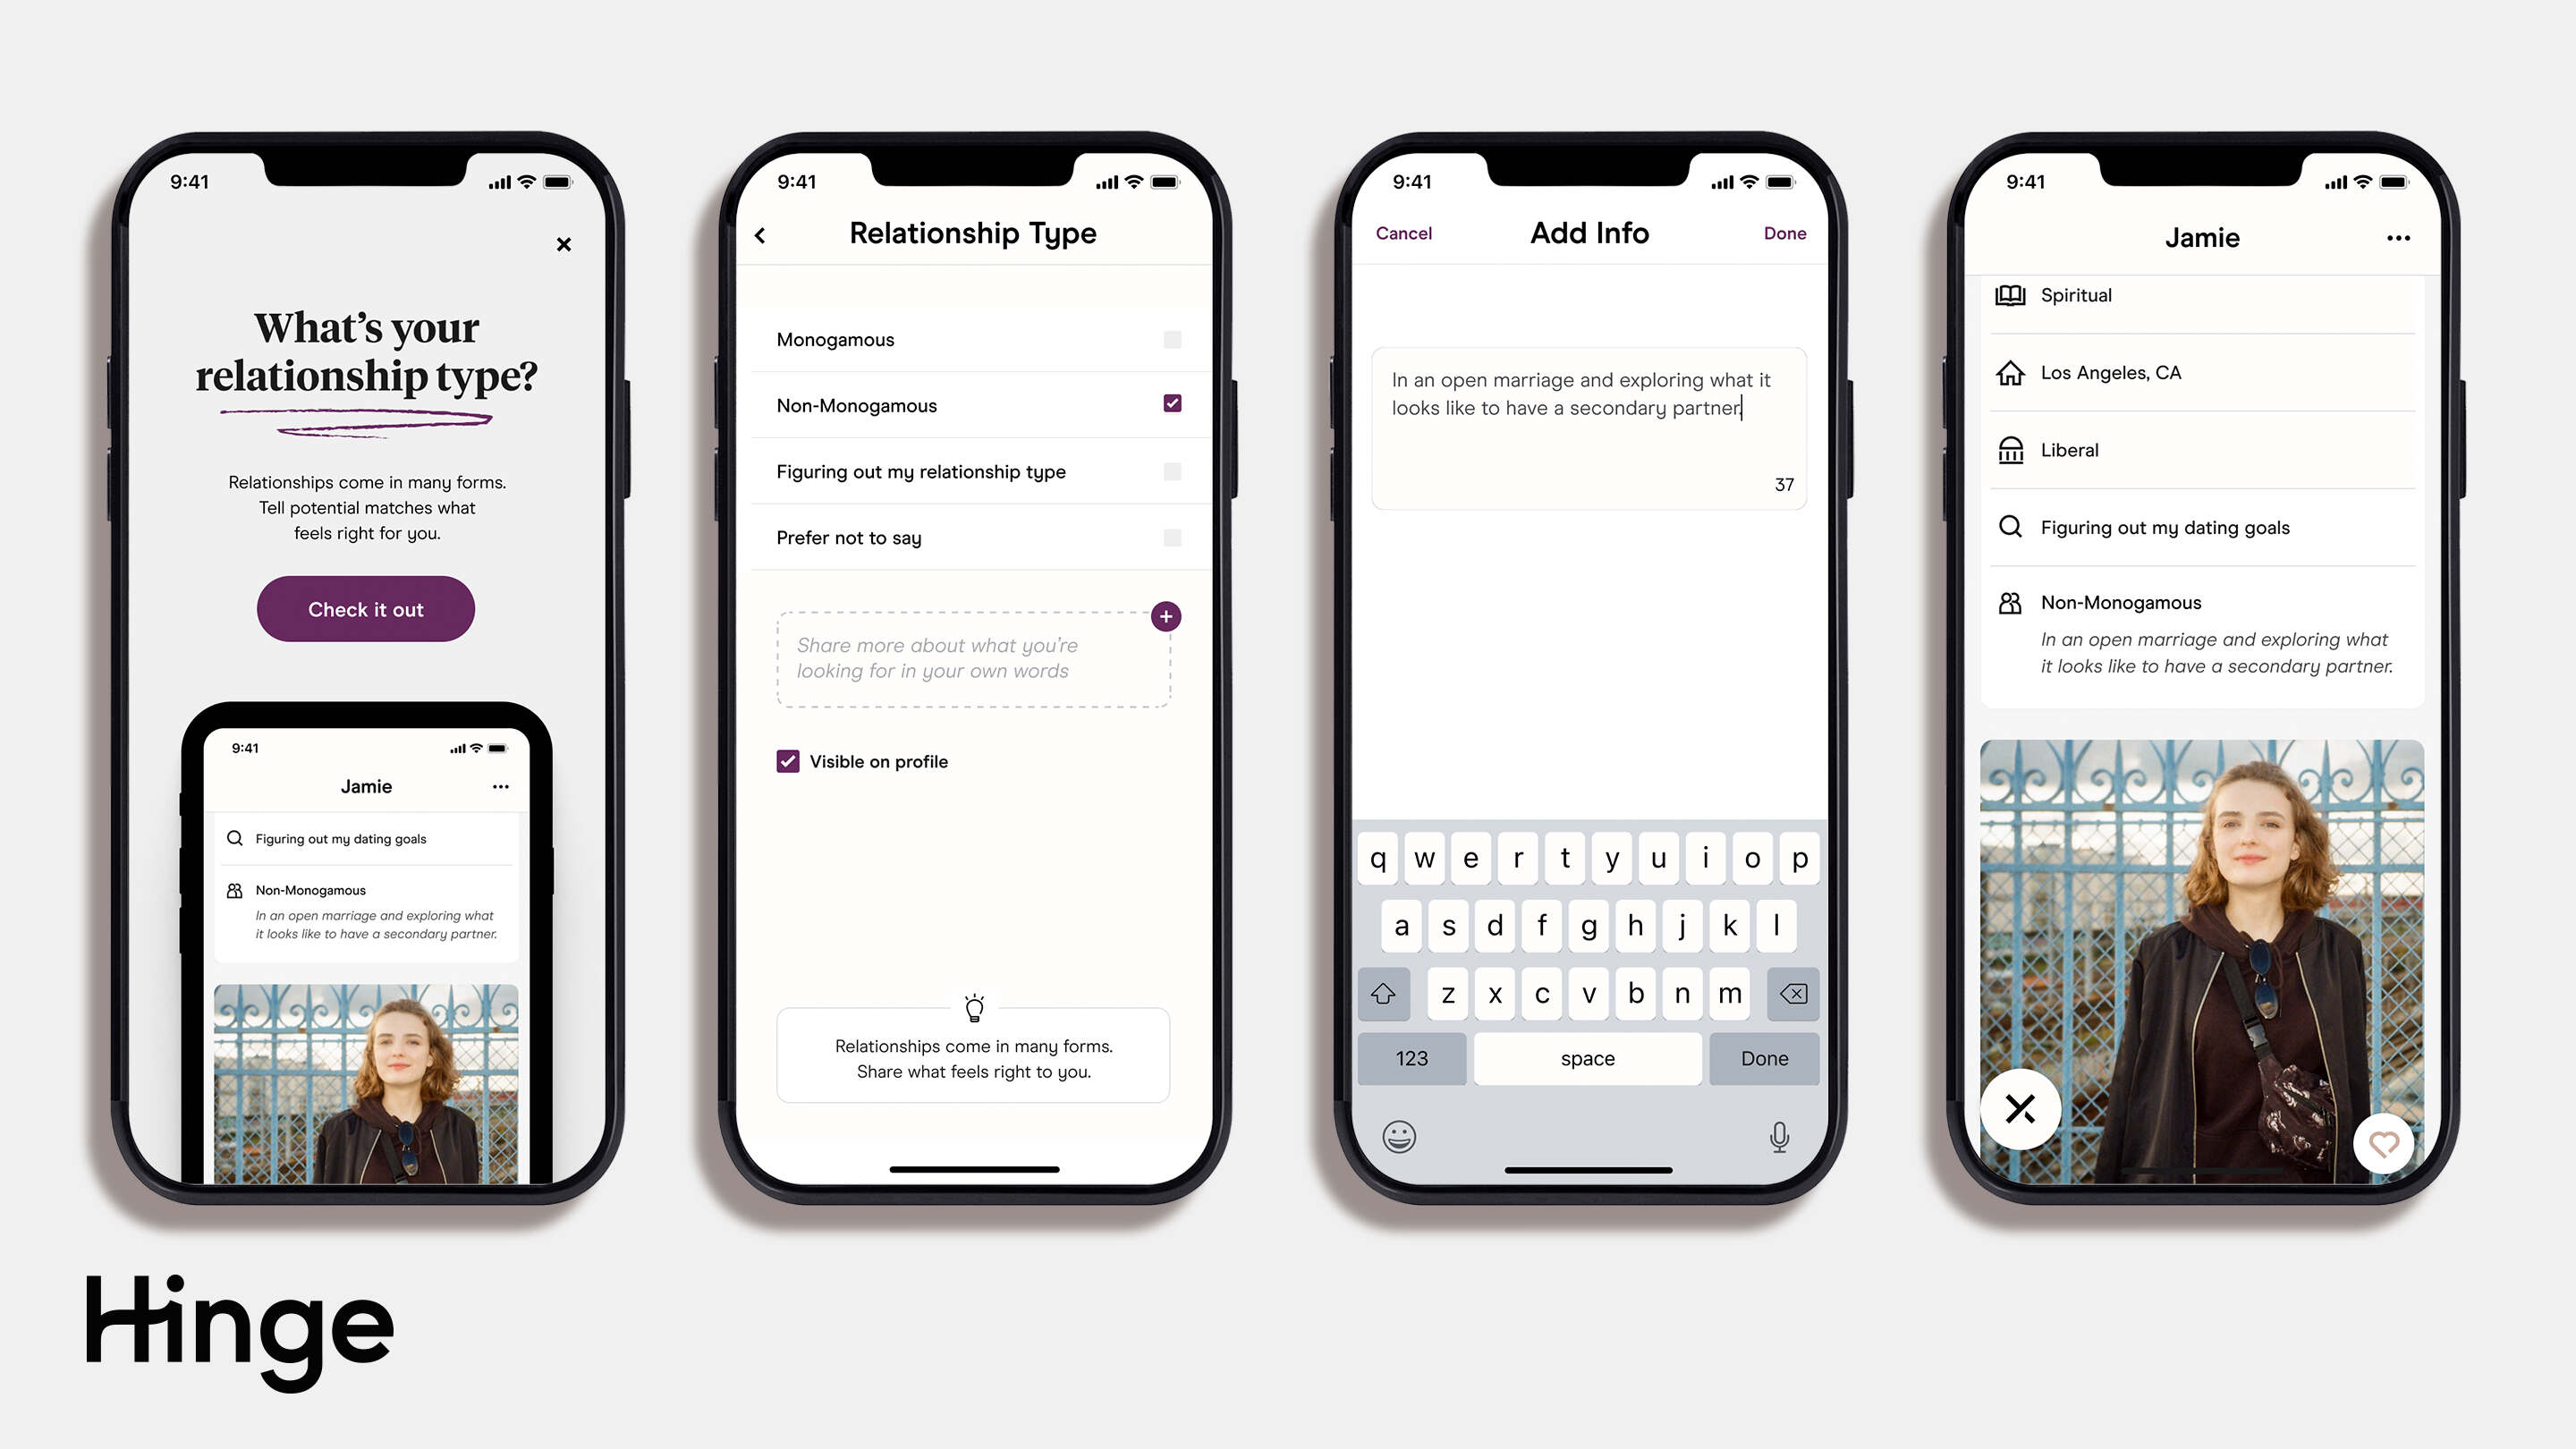 hinge-wants-to-know-about-your-dating-life-introduces-new-feature